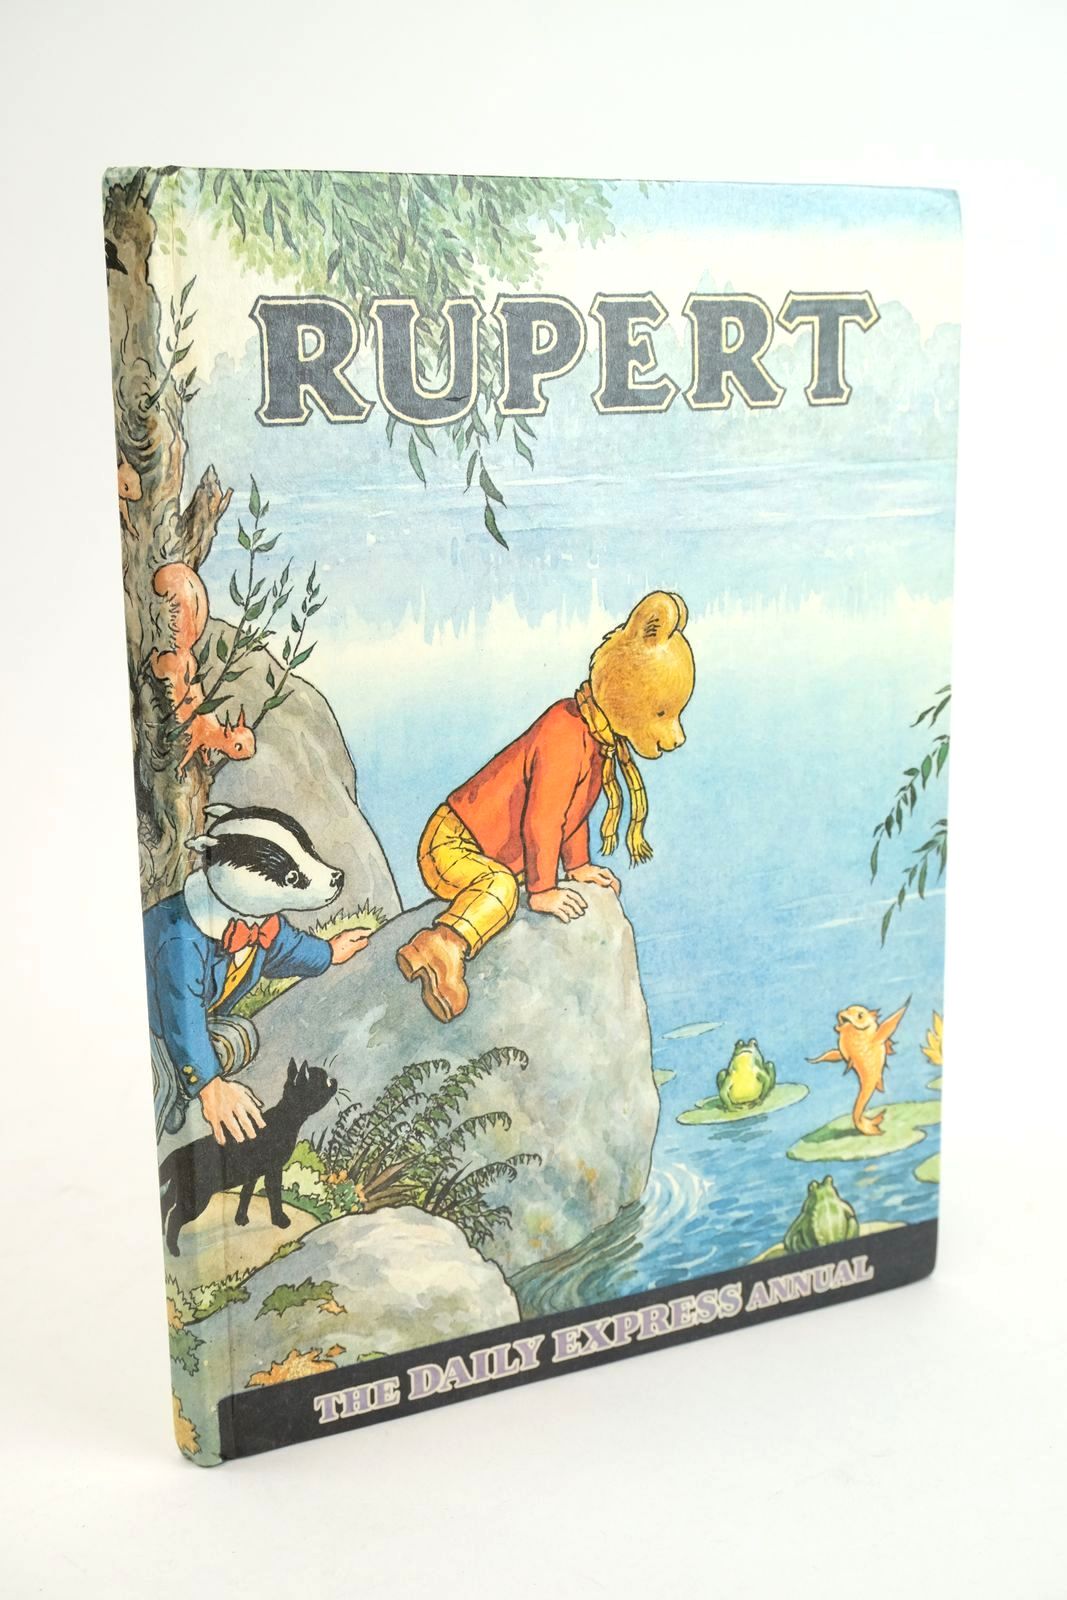 Photo of RUPERT ANNUAL 1969 written by Bestall, Alfred illustrated by Bestall, Alfred published by Daily Express (STOCK CODE: 1323764)  for sale by Stella & Rose's Books